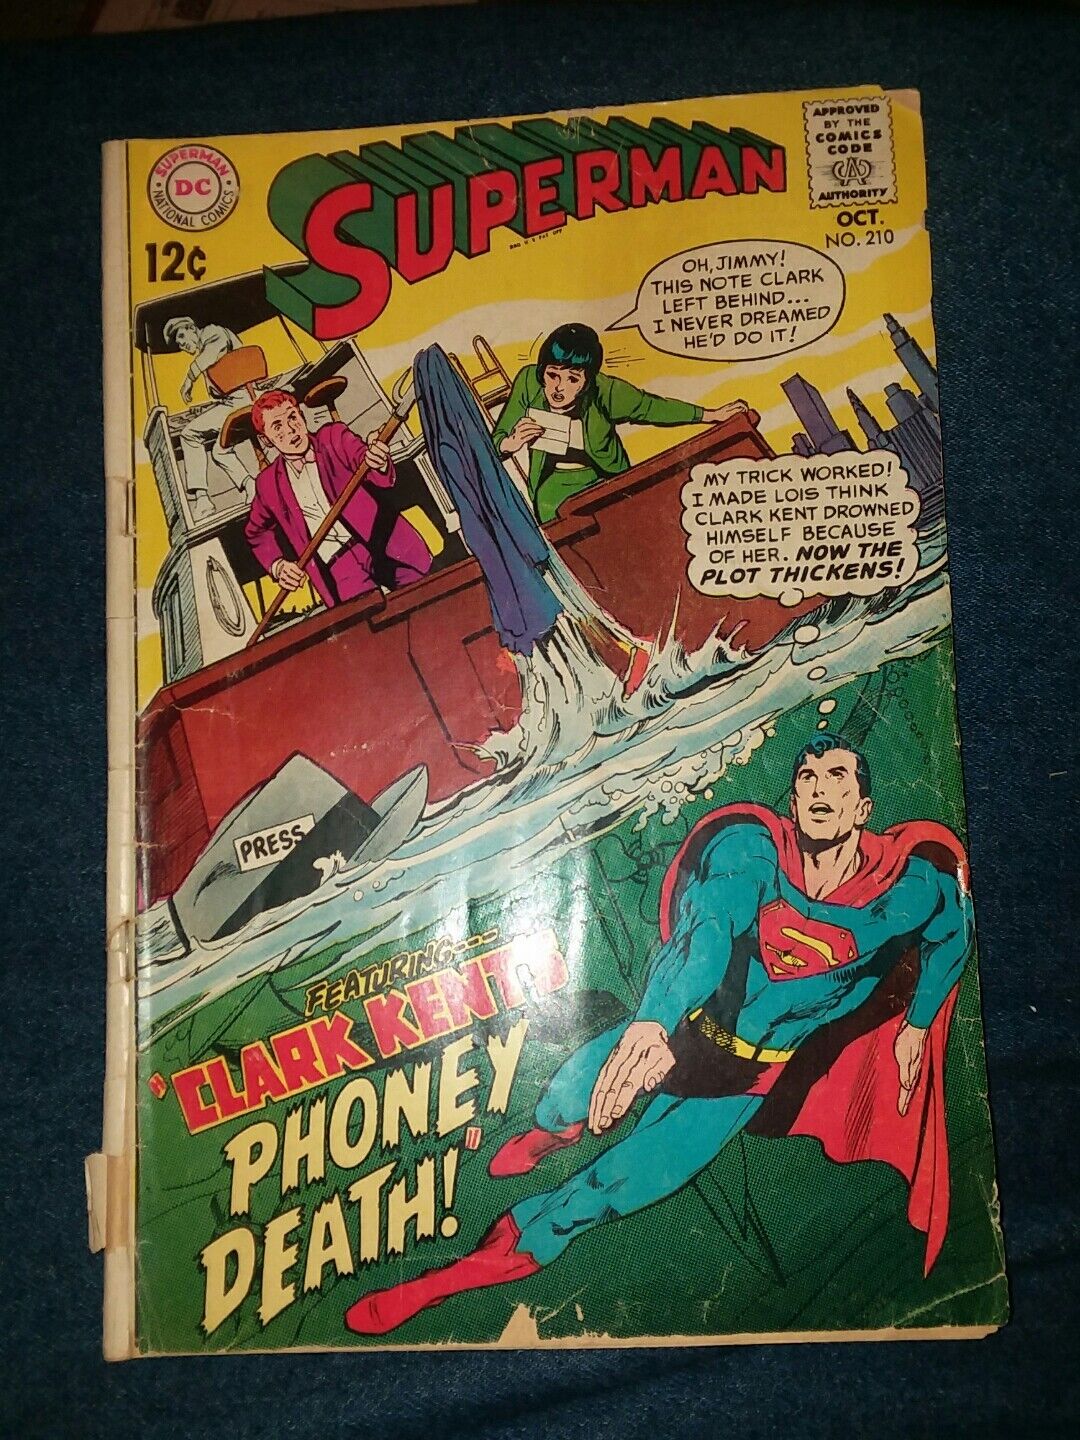 Superman (1st Series) #210 neal adams cover art 1968 dc comics silver age action